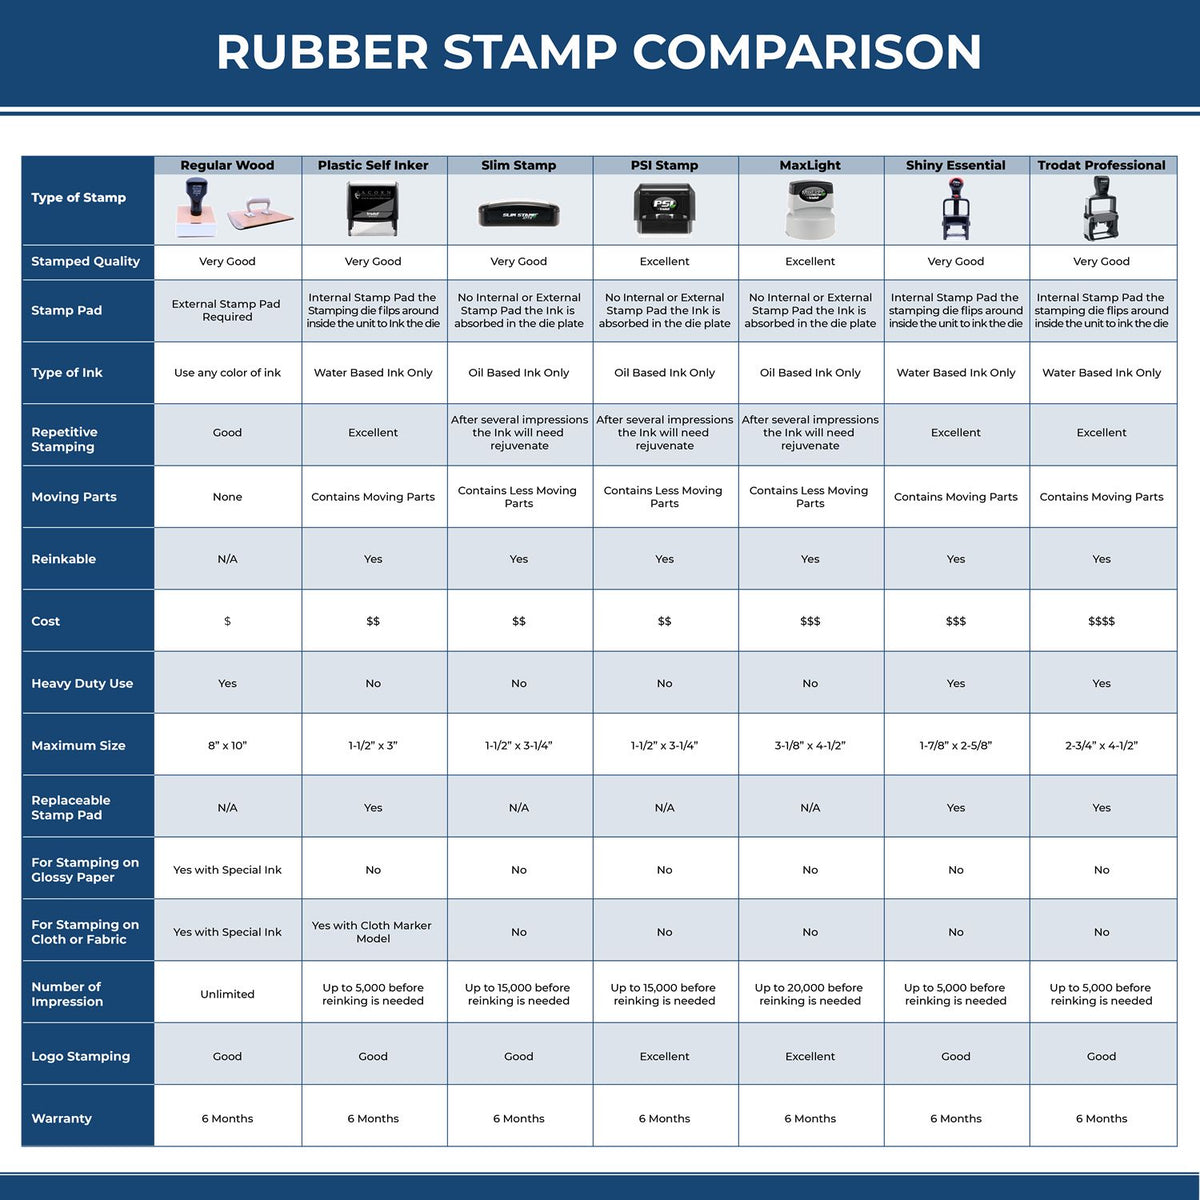 A comparison chart for the different types of mount models available for the Super Slim Wisconsin Notary Public Stamp.